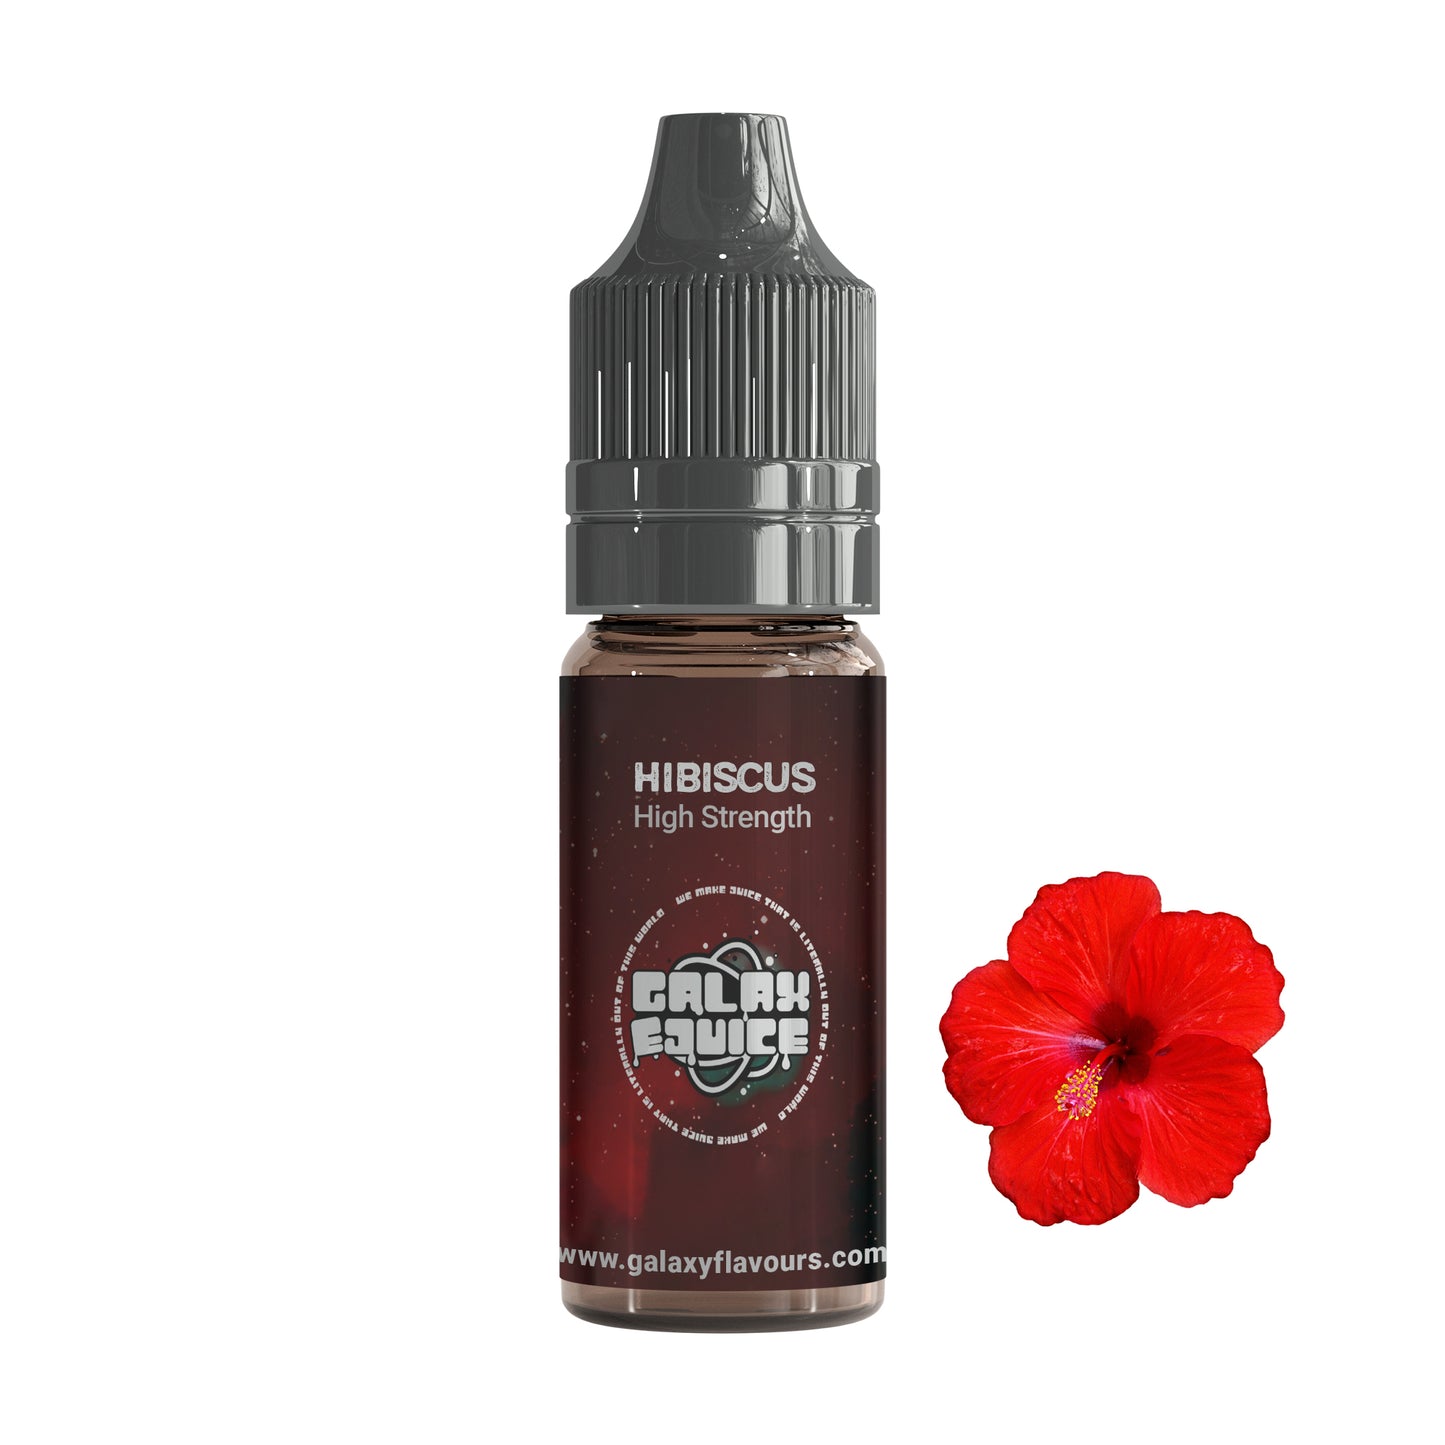 Hibiscus High Strength Professional Flavouring.